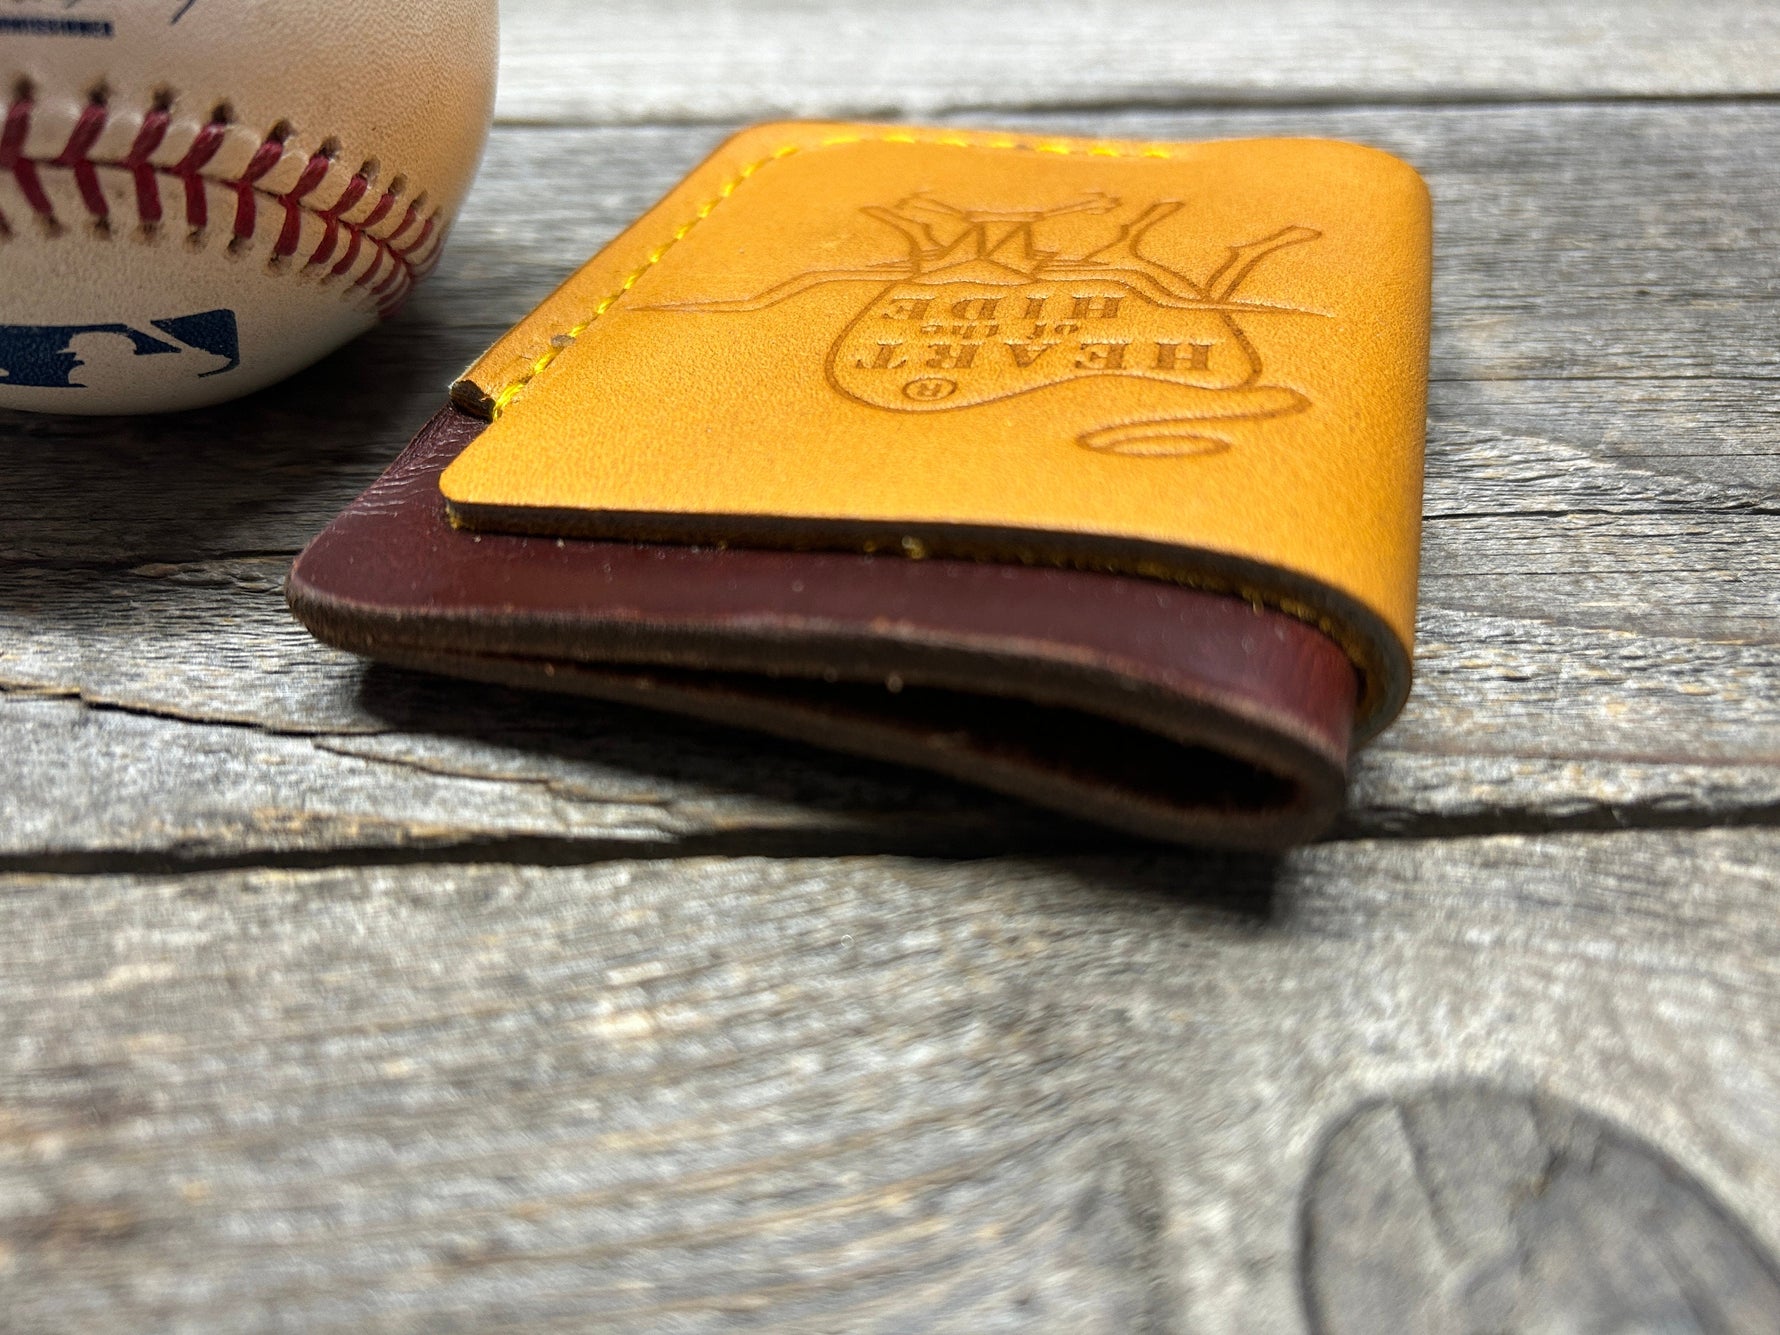 New Style! Rawlings Heart of the Hide Horween Top Loading Baseball Glove Wallet with Hidden 3rd Pocket!!